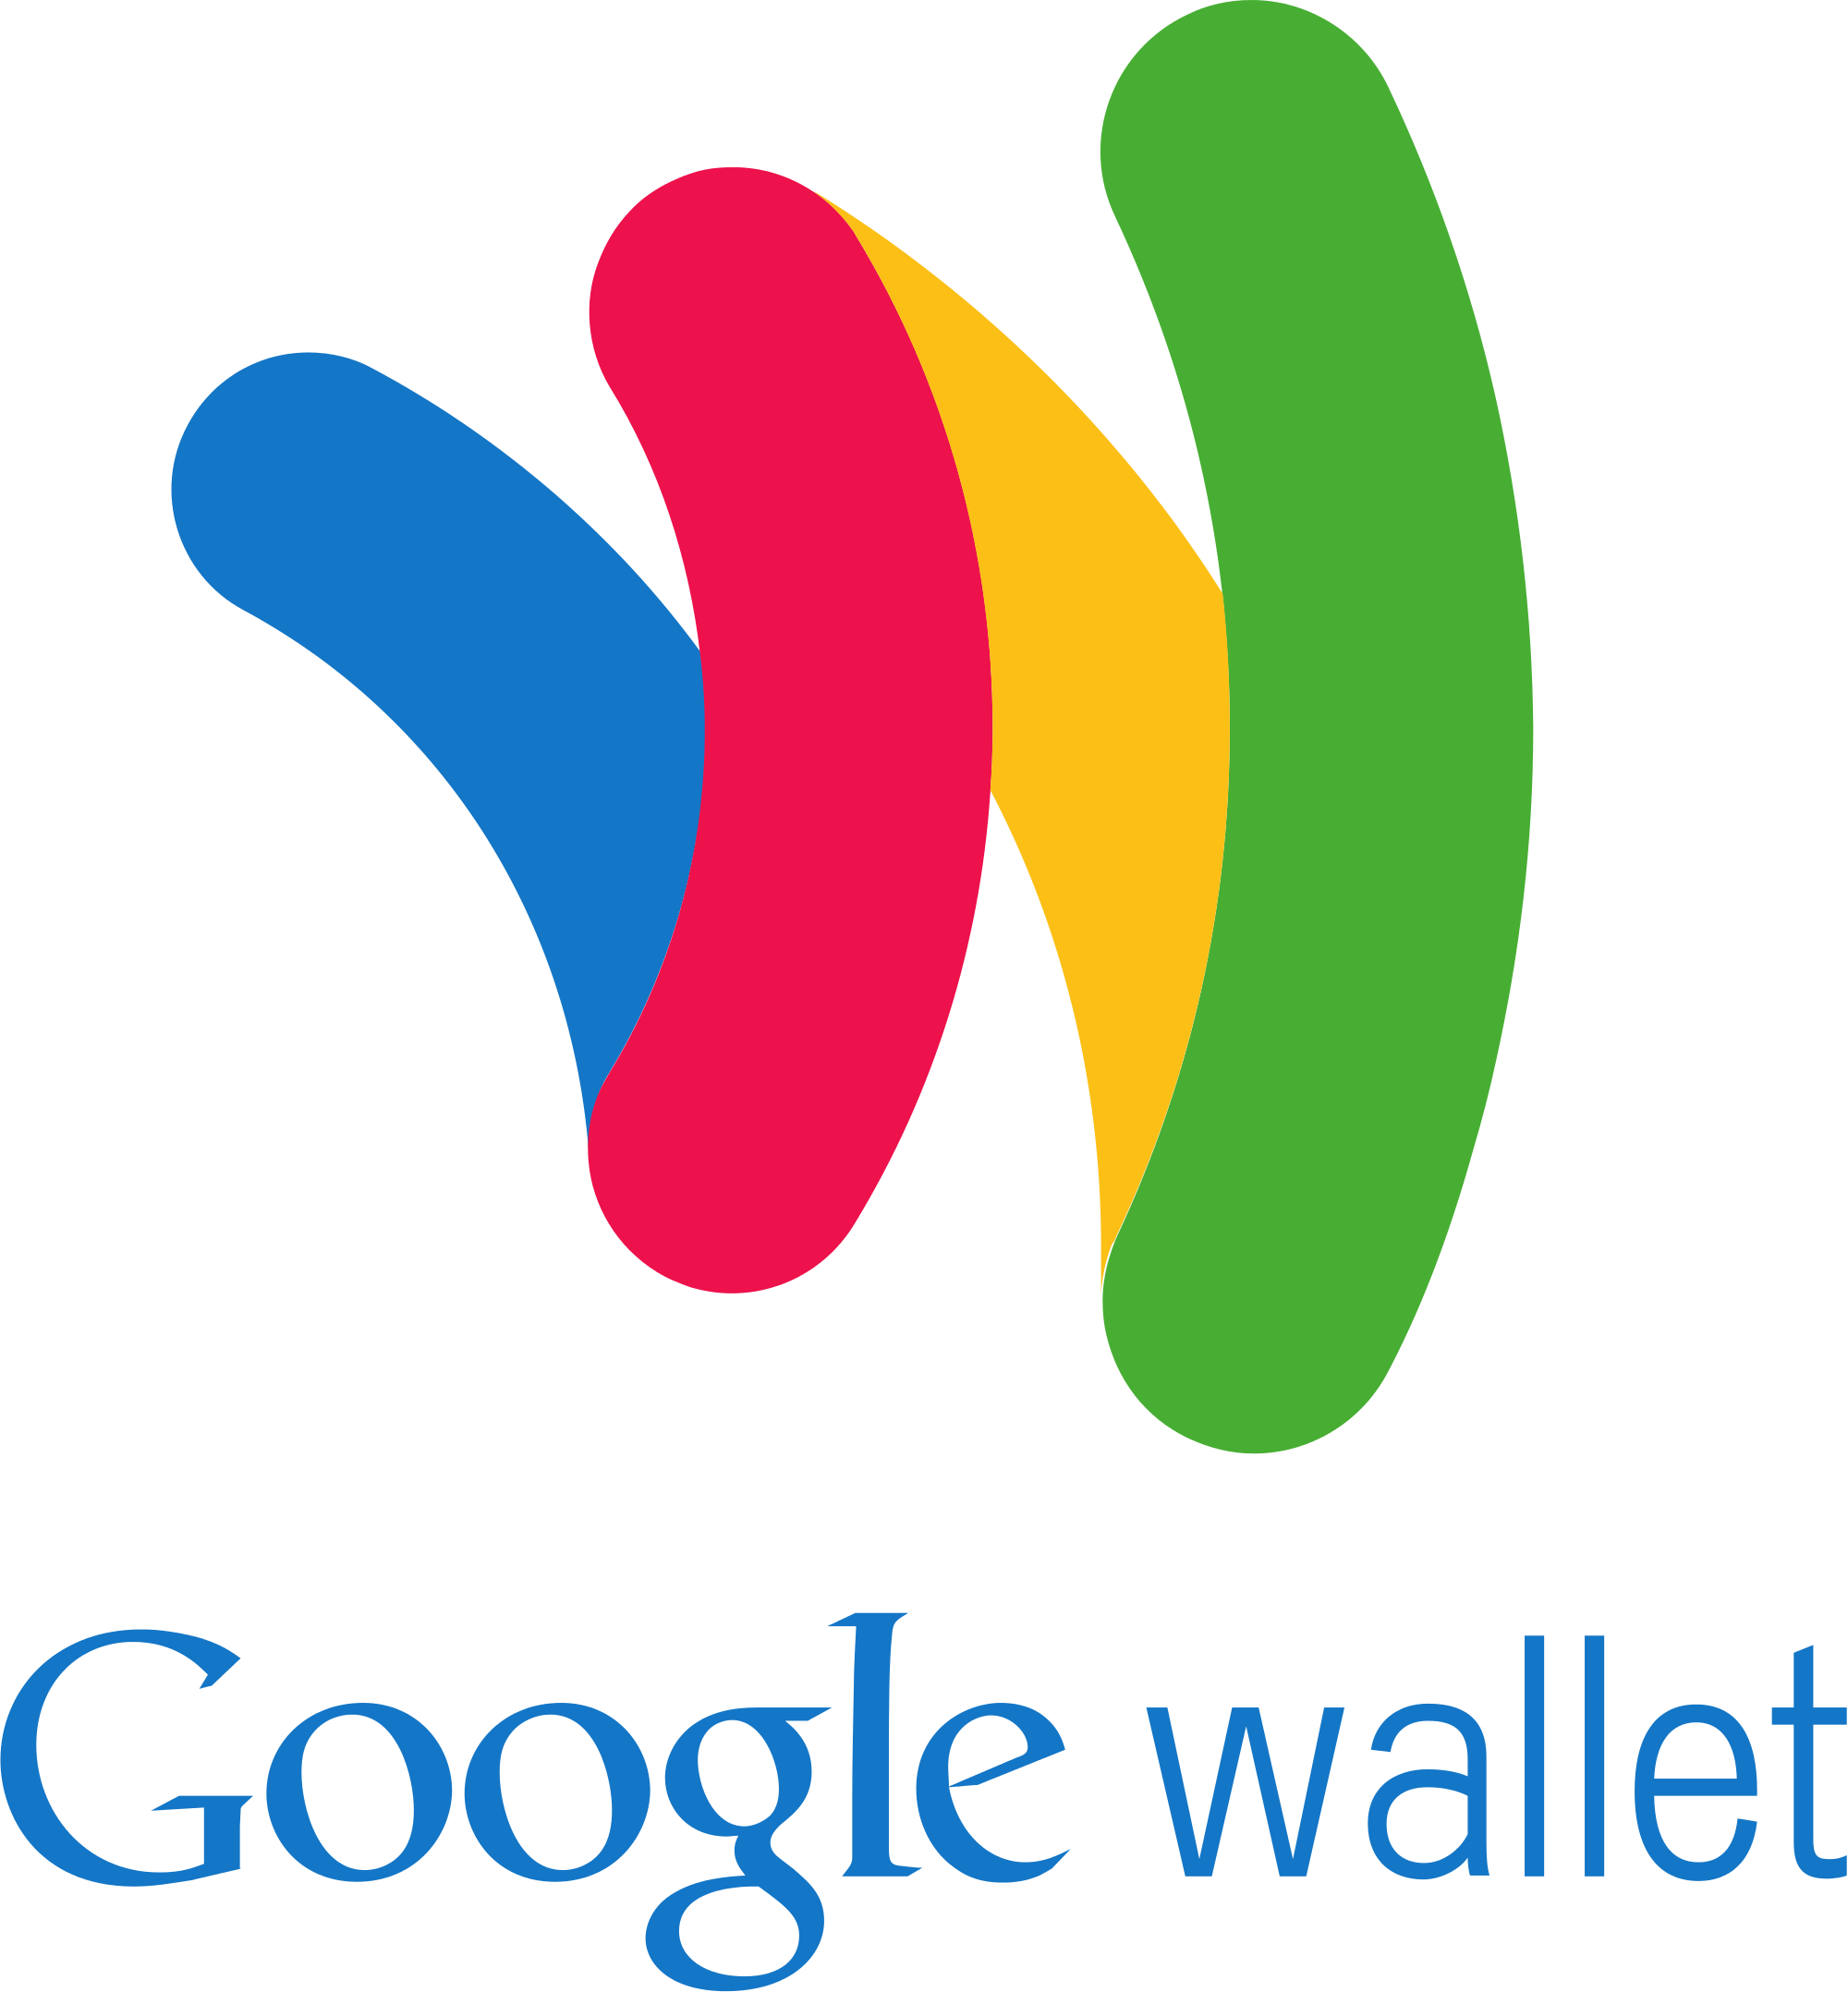 Mobile Wallet Logo - 8 companies that want to build your mobile wallet